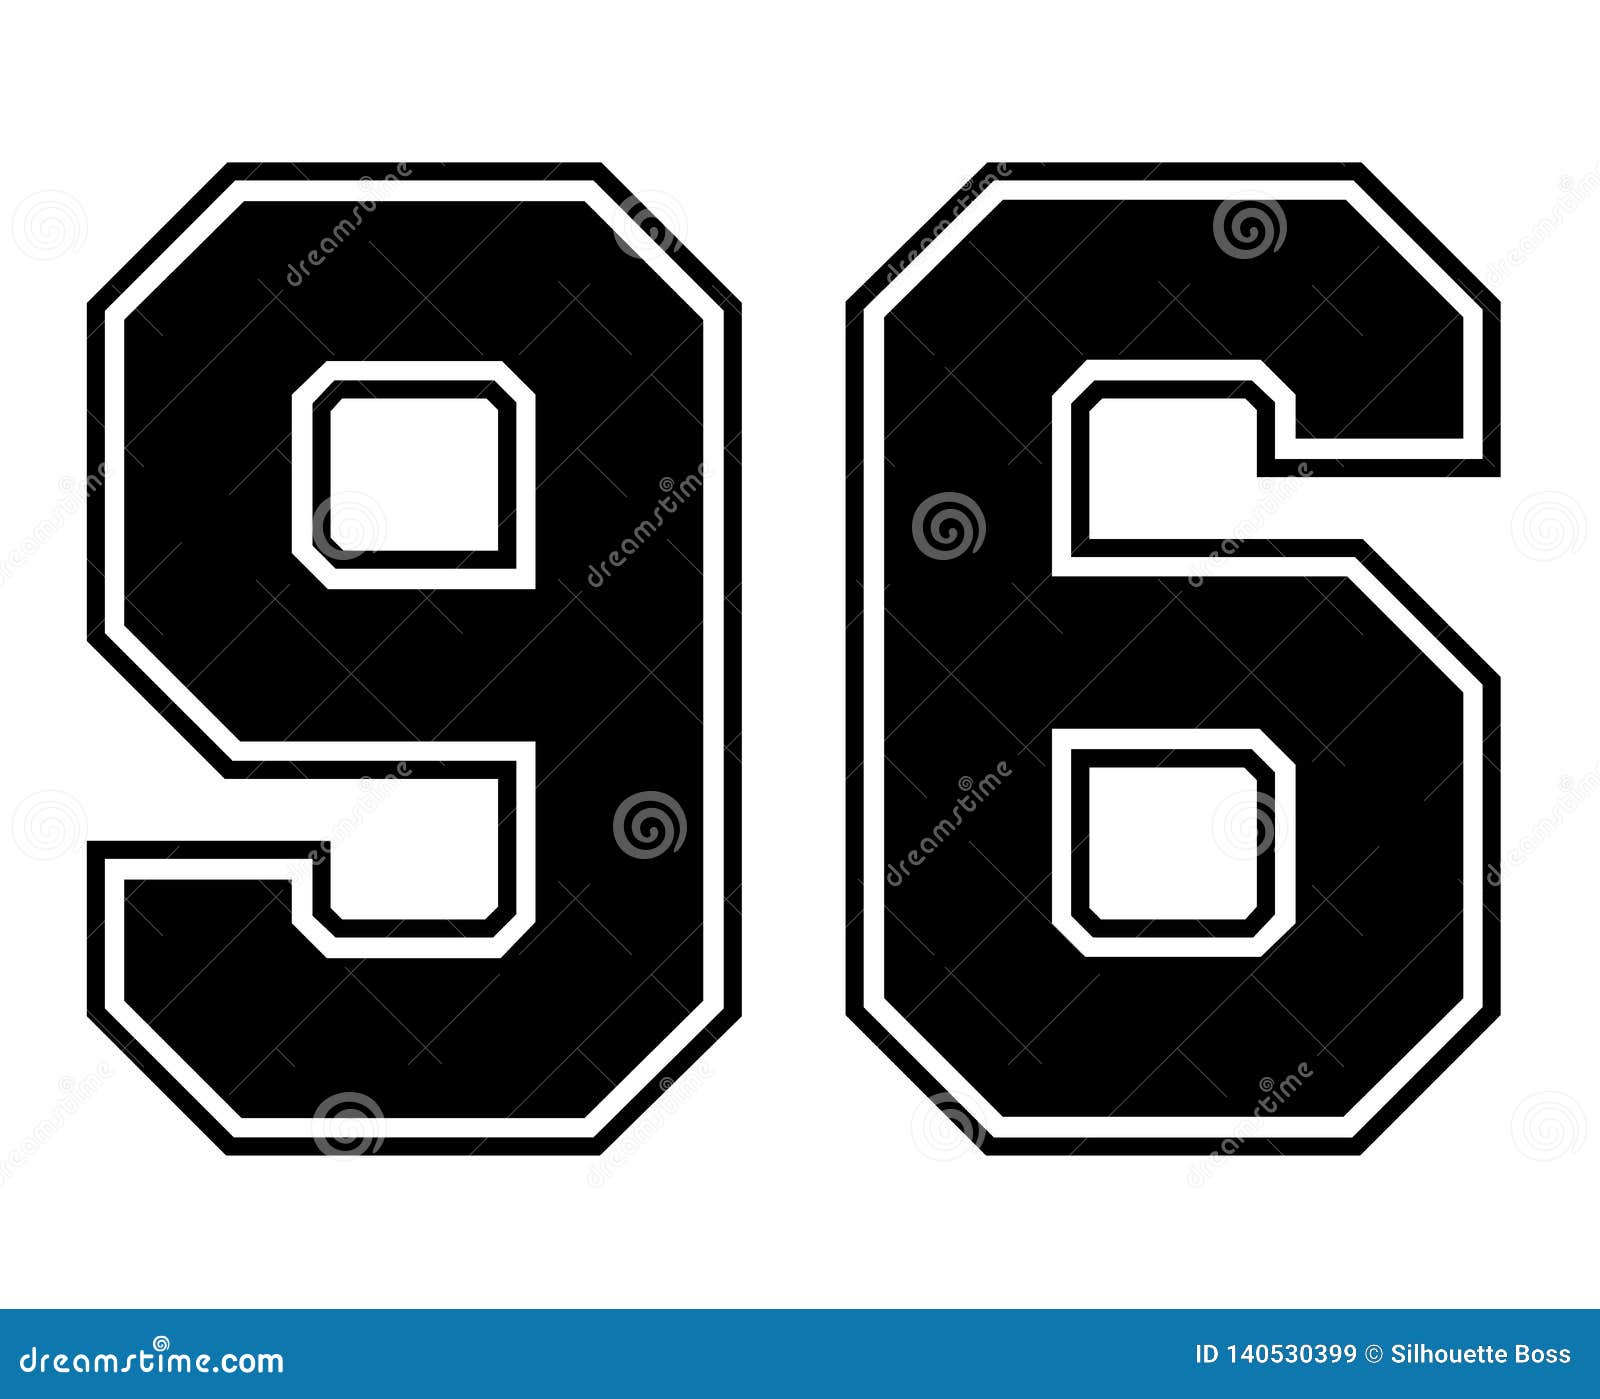 96 jersey number